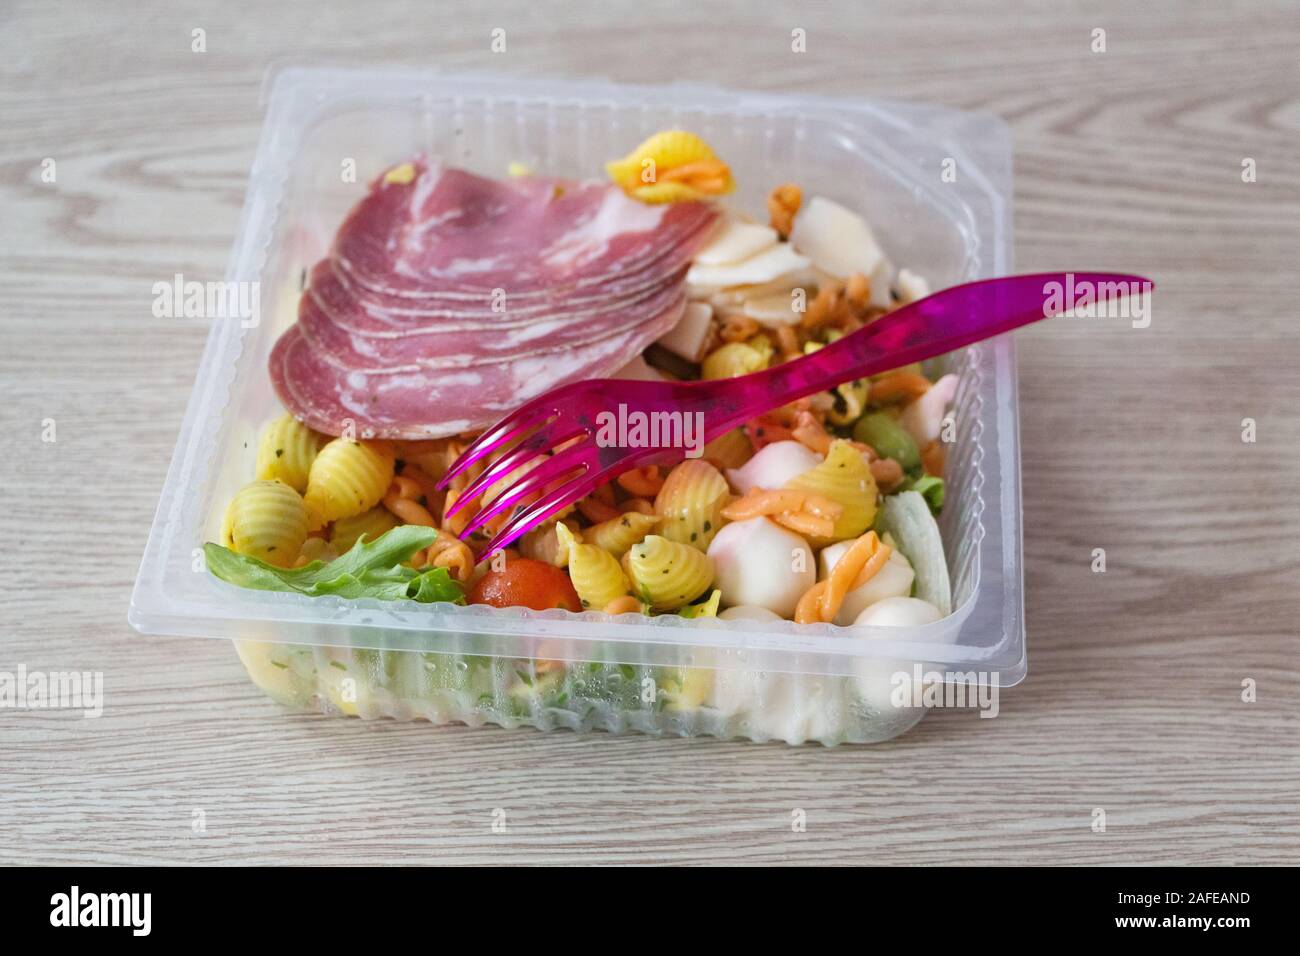 Industrial mixed salad and plastic fork Stock Photo